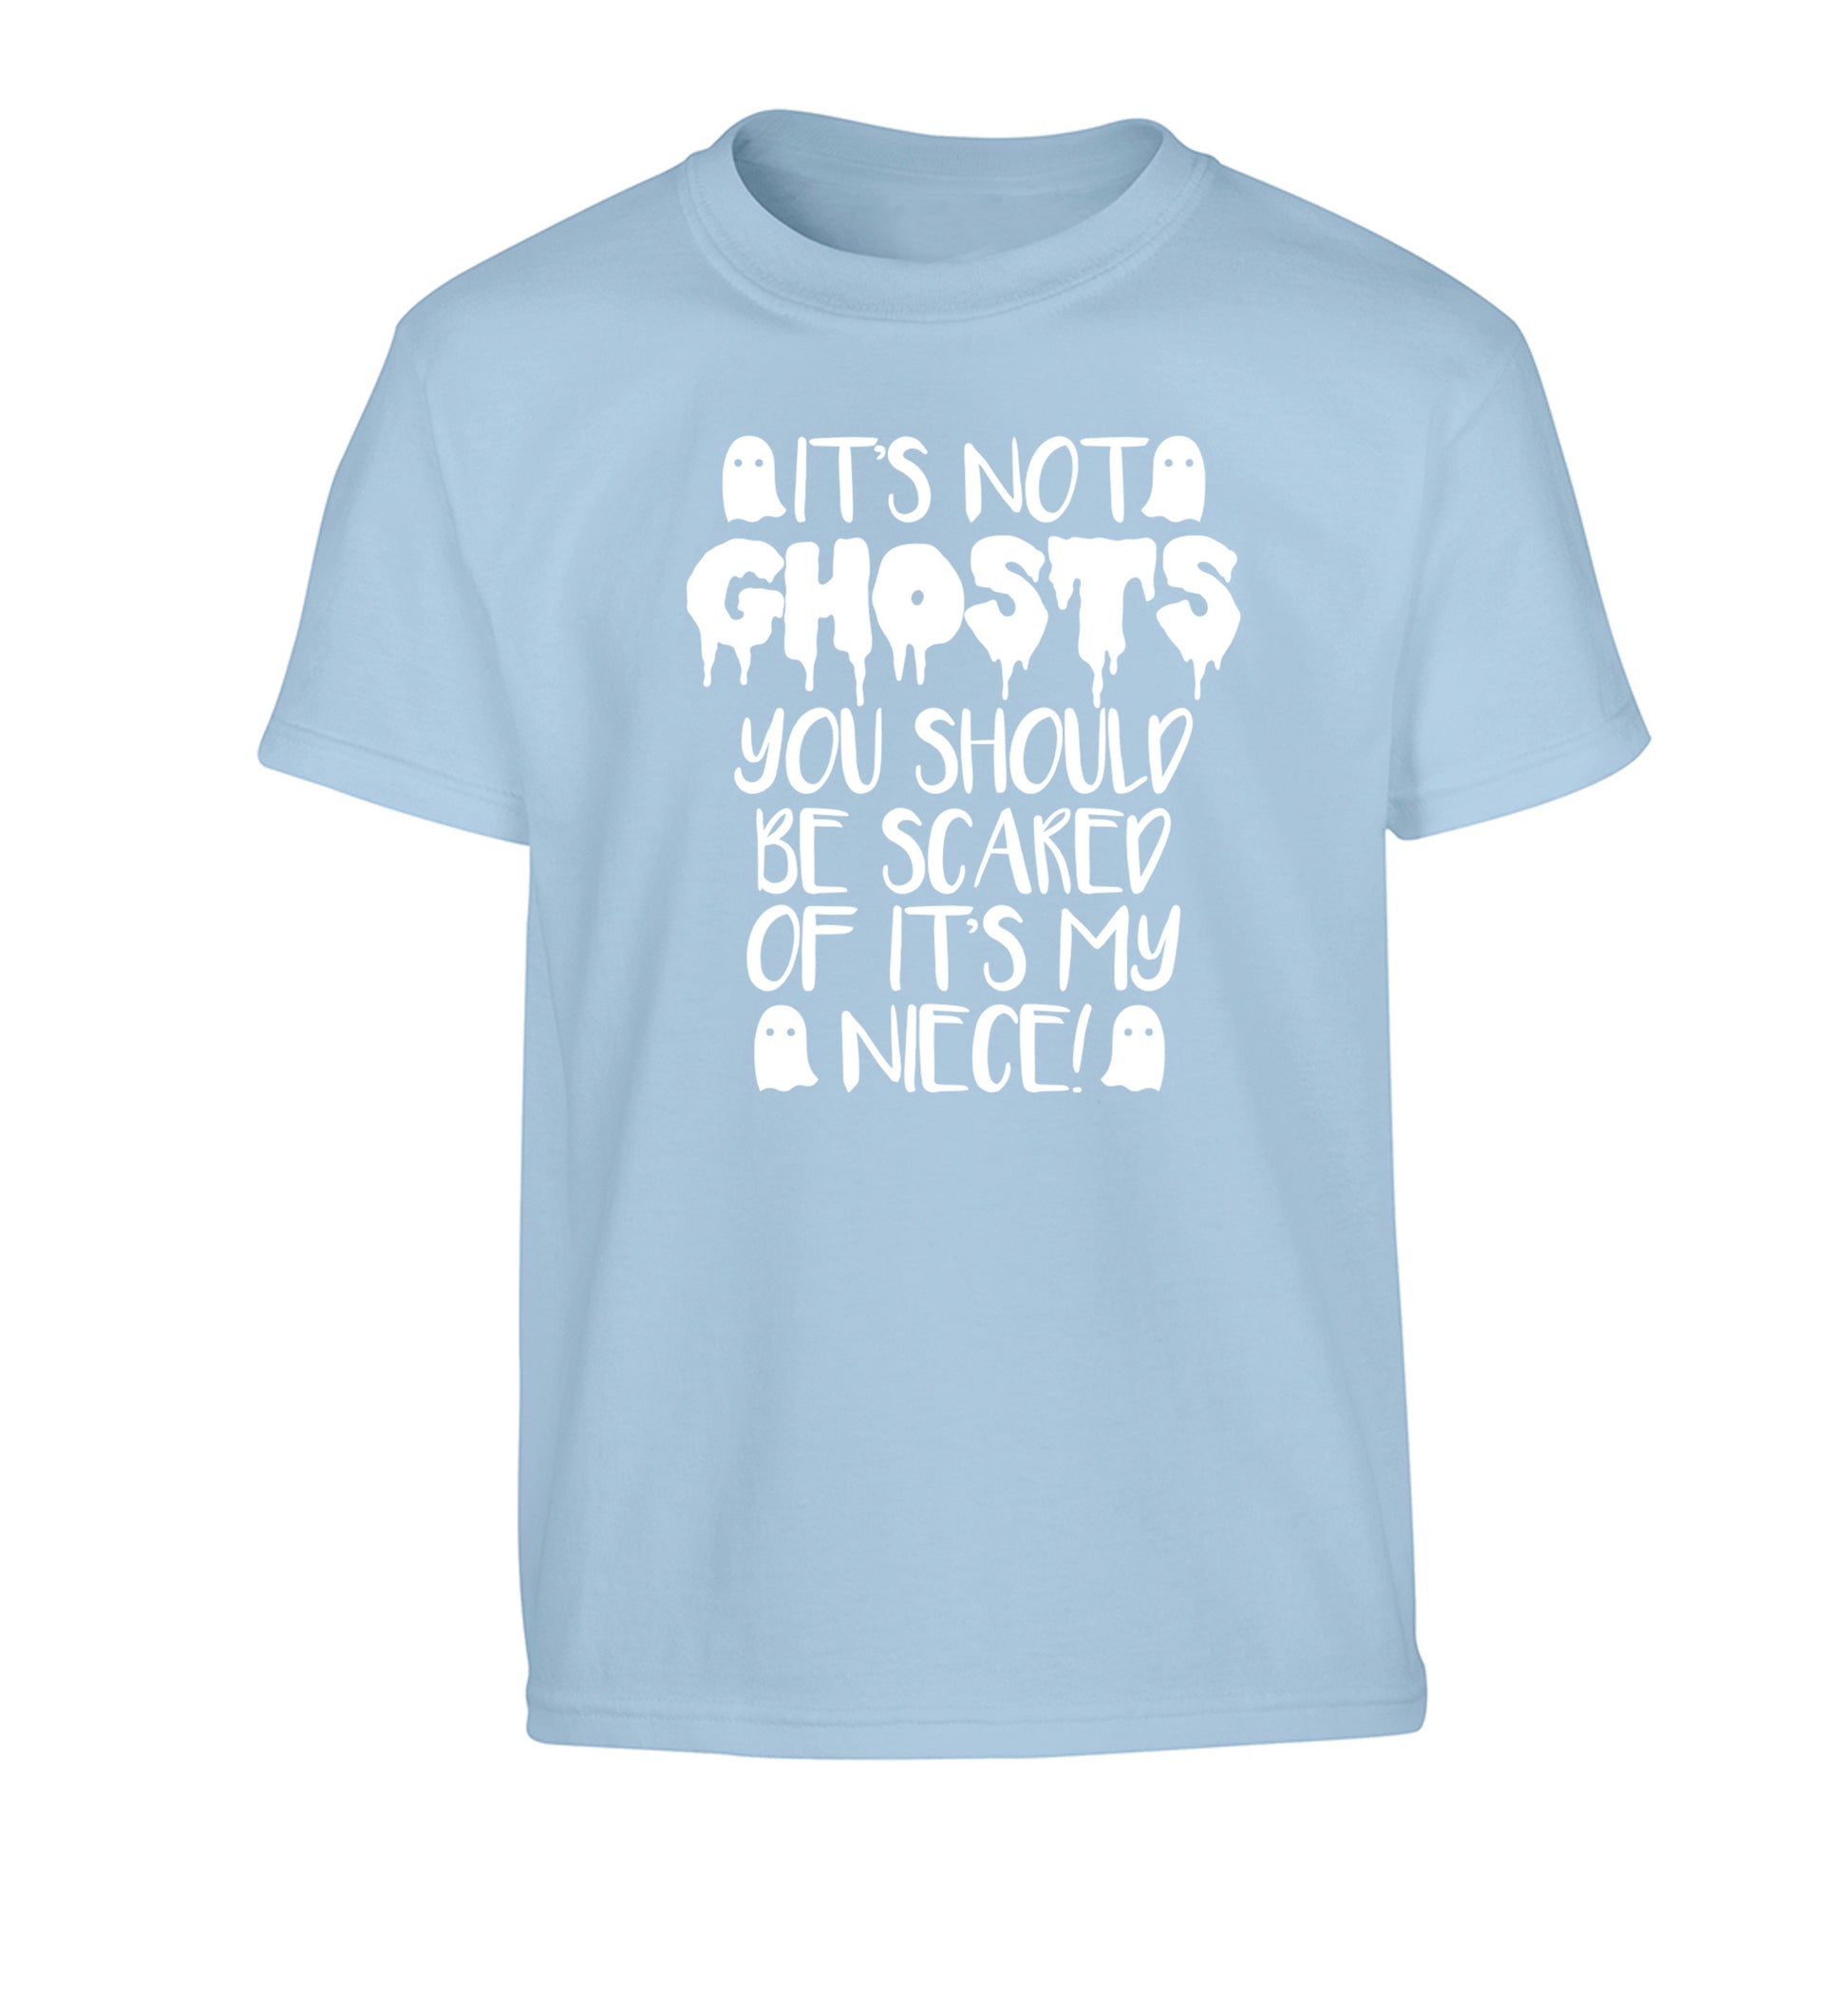 It's not ghosts you should be scared of it's my niece! Children's light blue Tshirt 12-14 Years